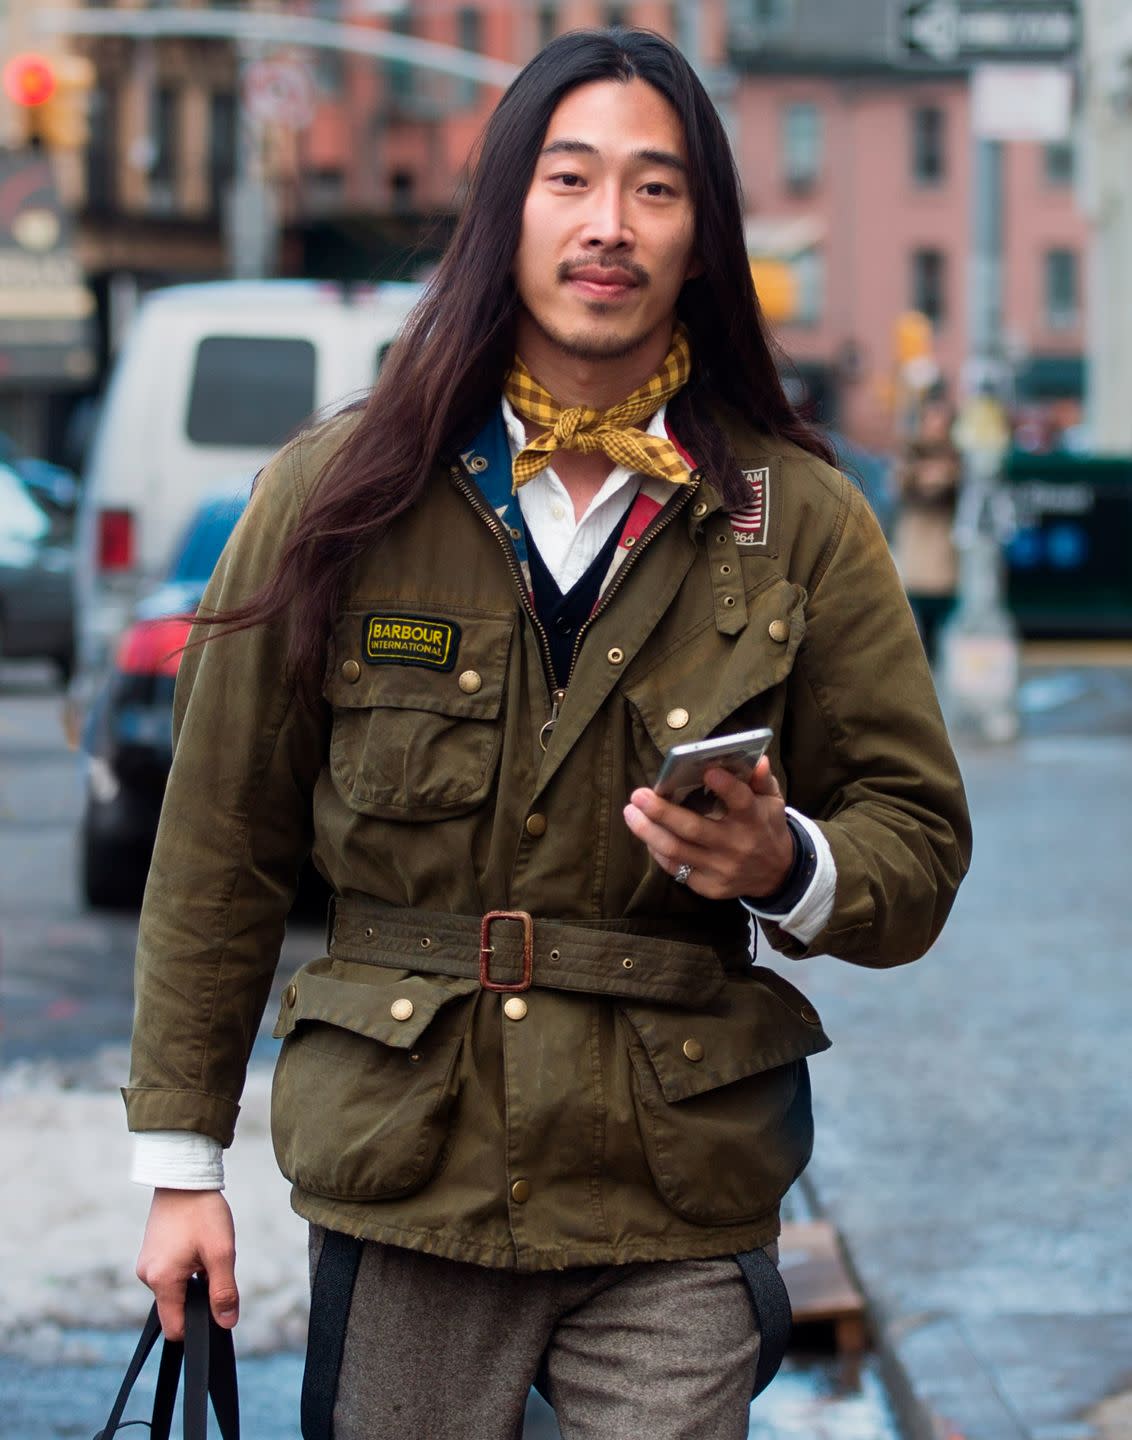 street style photo by andrew moraleswwdpenske media via getty images